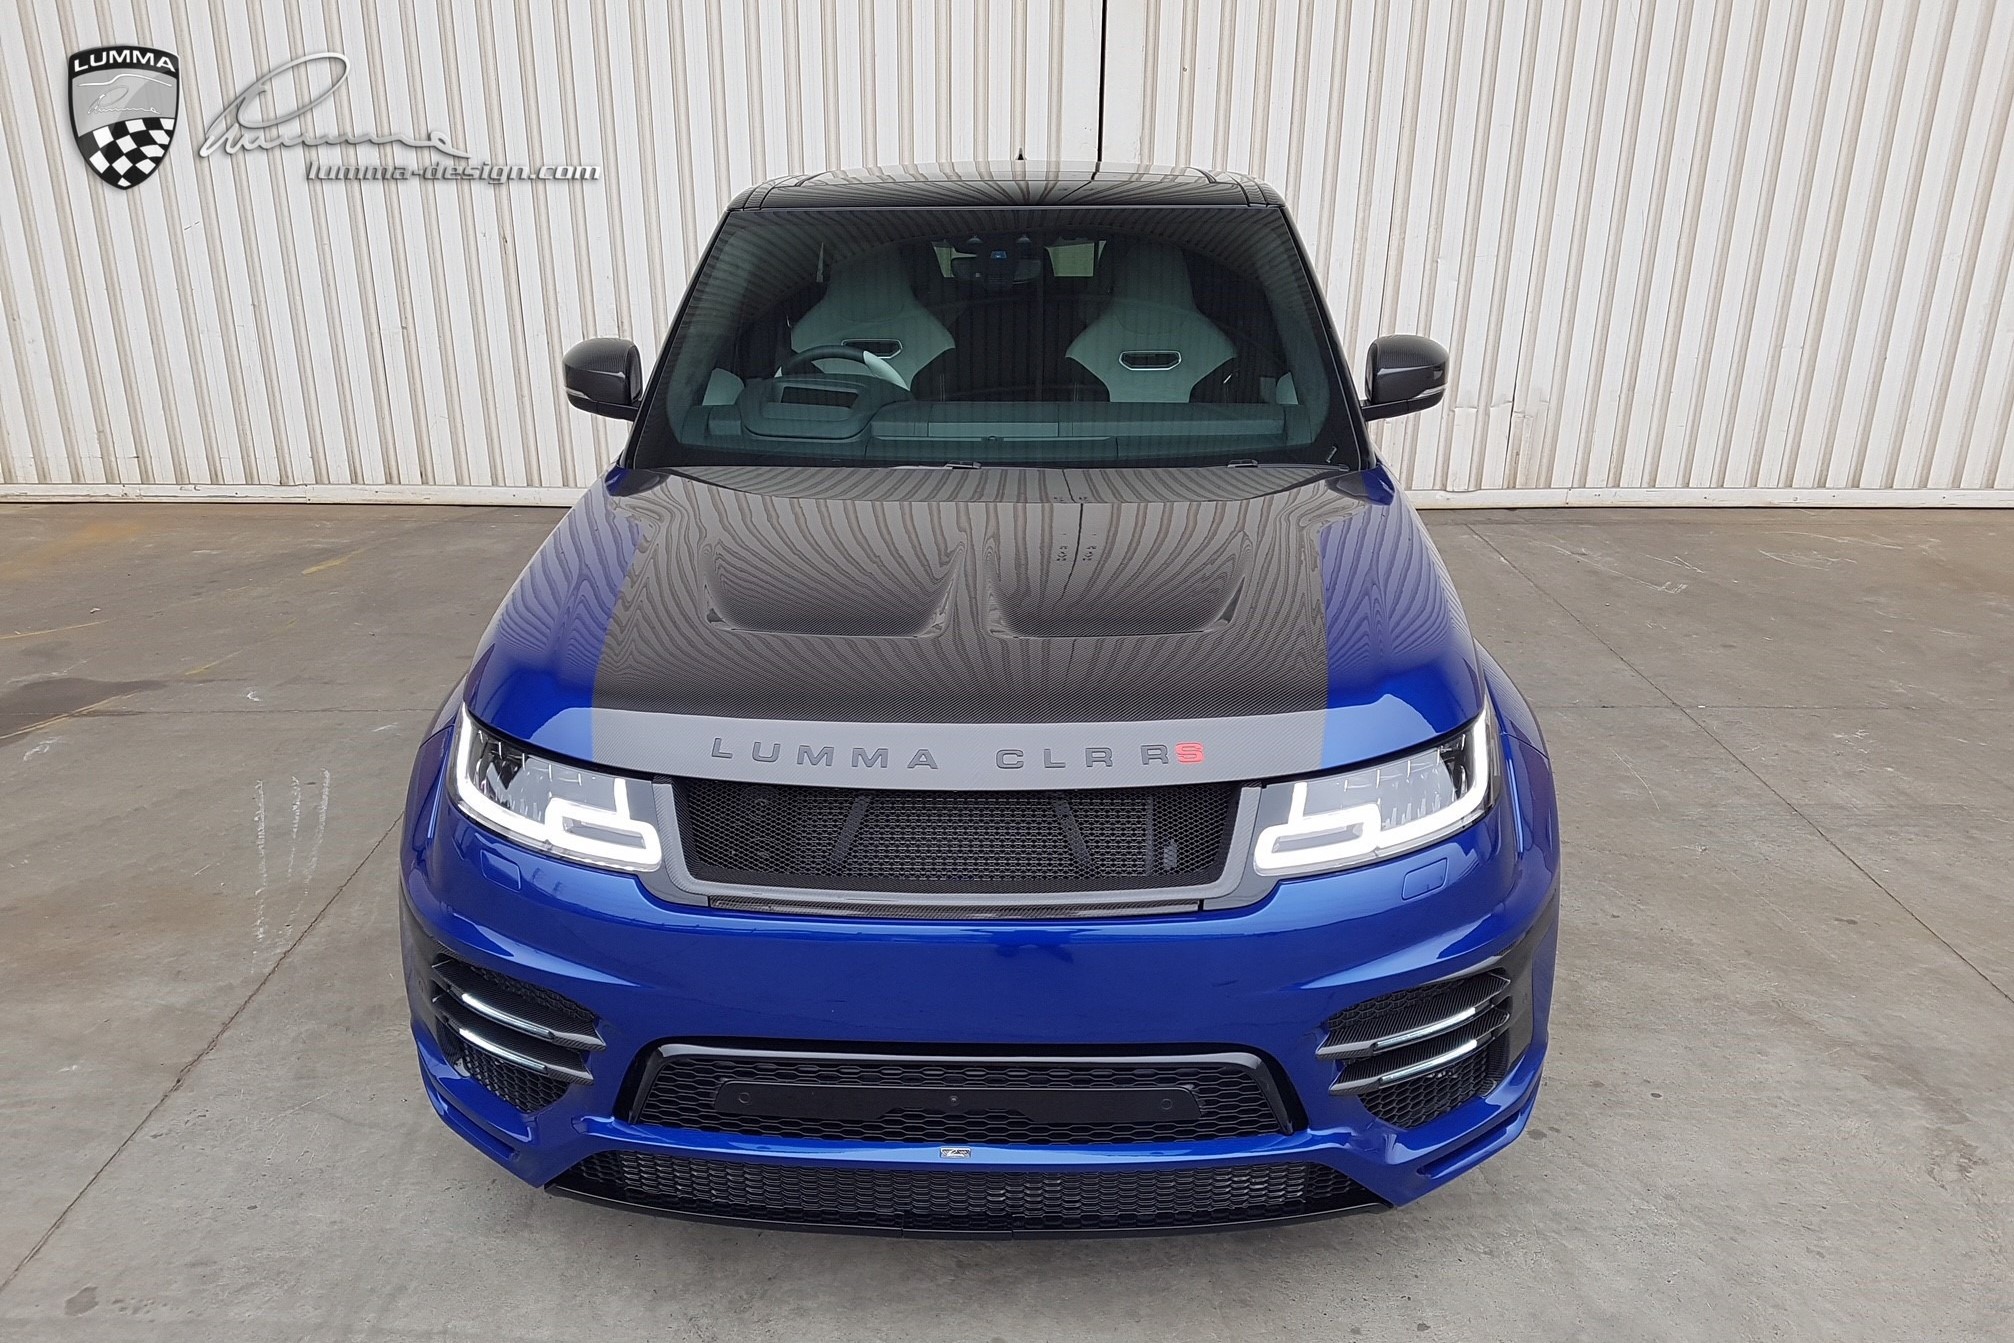 The First Lumma Design 2018 Range Rover SVR Built Right Here In South Africa